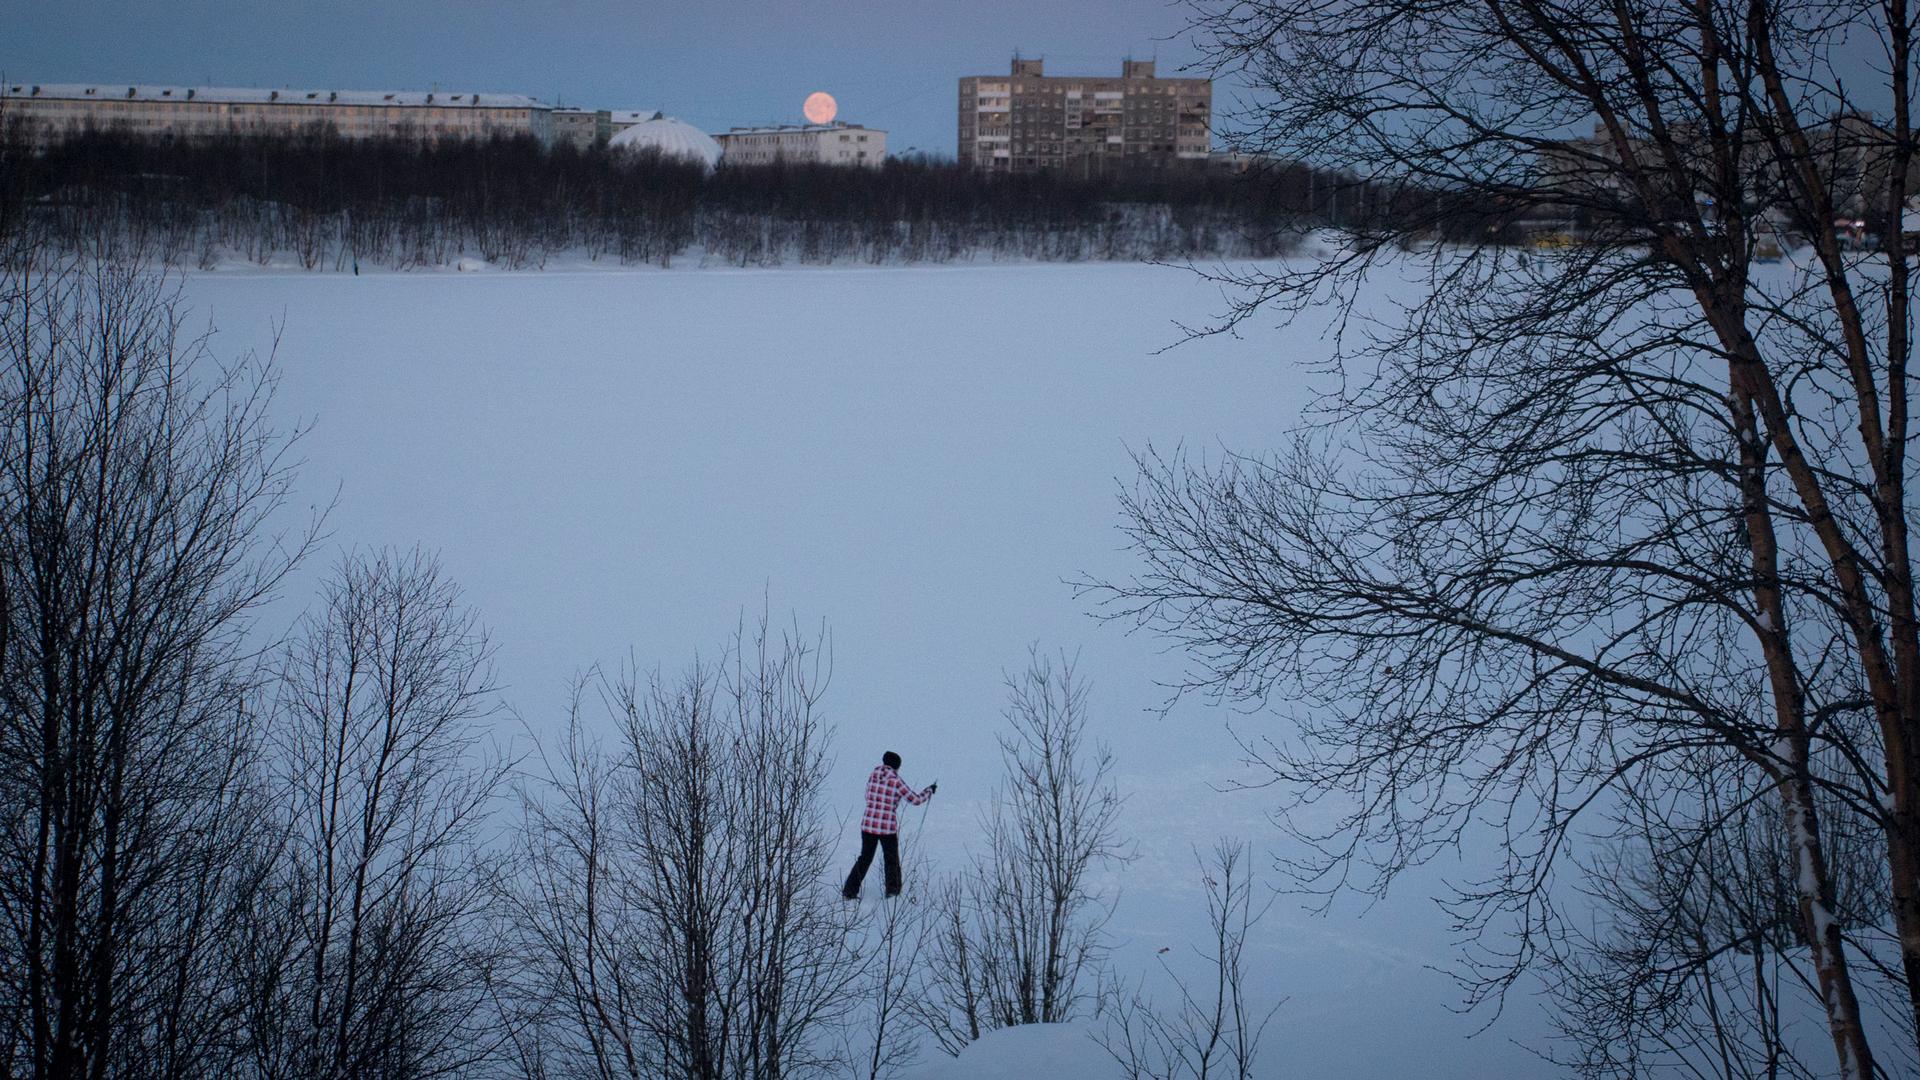 A person skis across a large snow-covered area with trees in the nearground and brick building and the moon in the background.